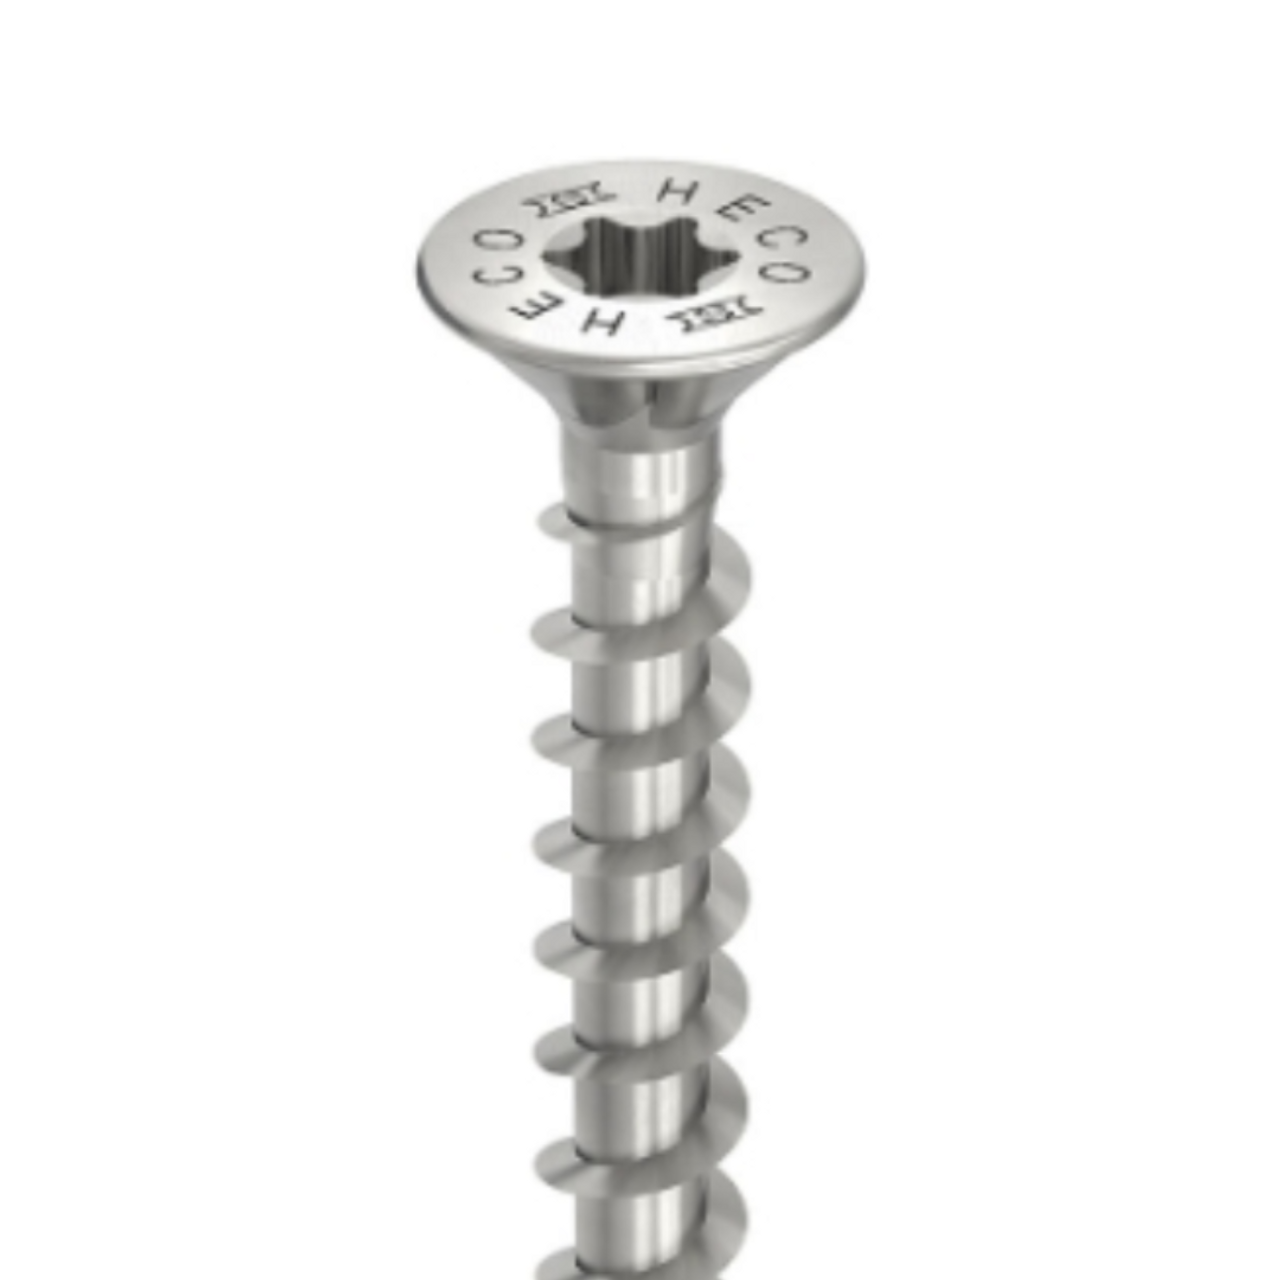 HECO Countersunk Head Screws | Find near me 4.5mm Countersunk Head Screws for Outdoor Screws and Façade screws with HD20 Drive